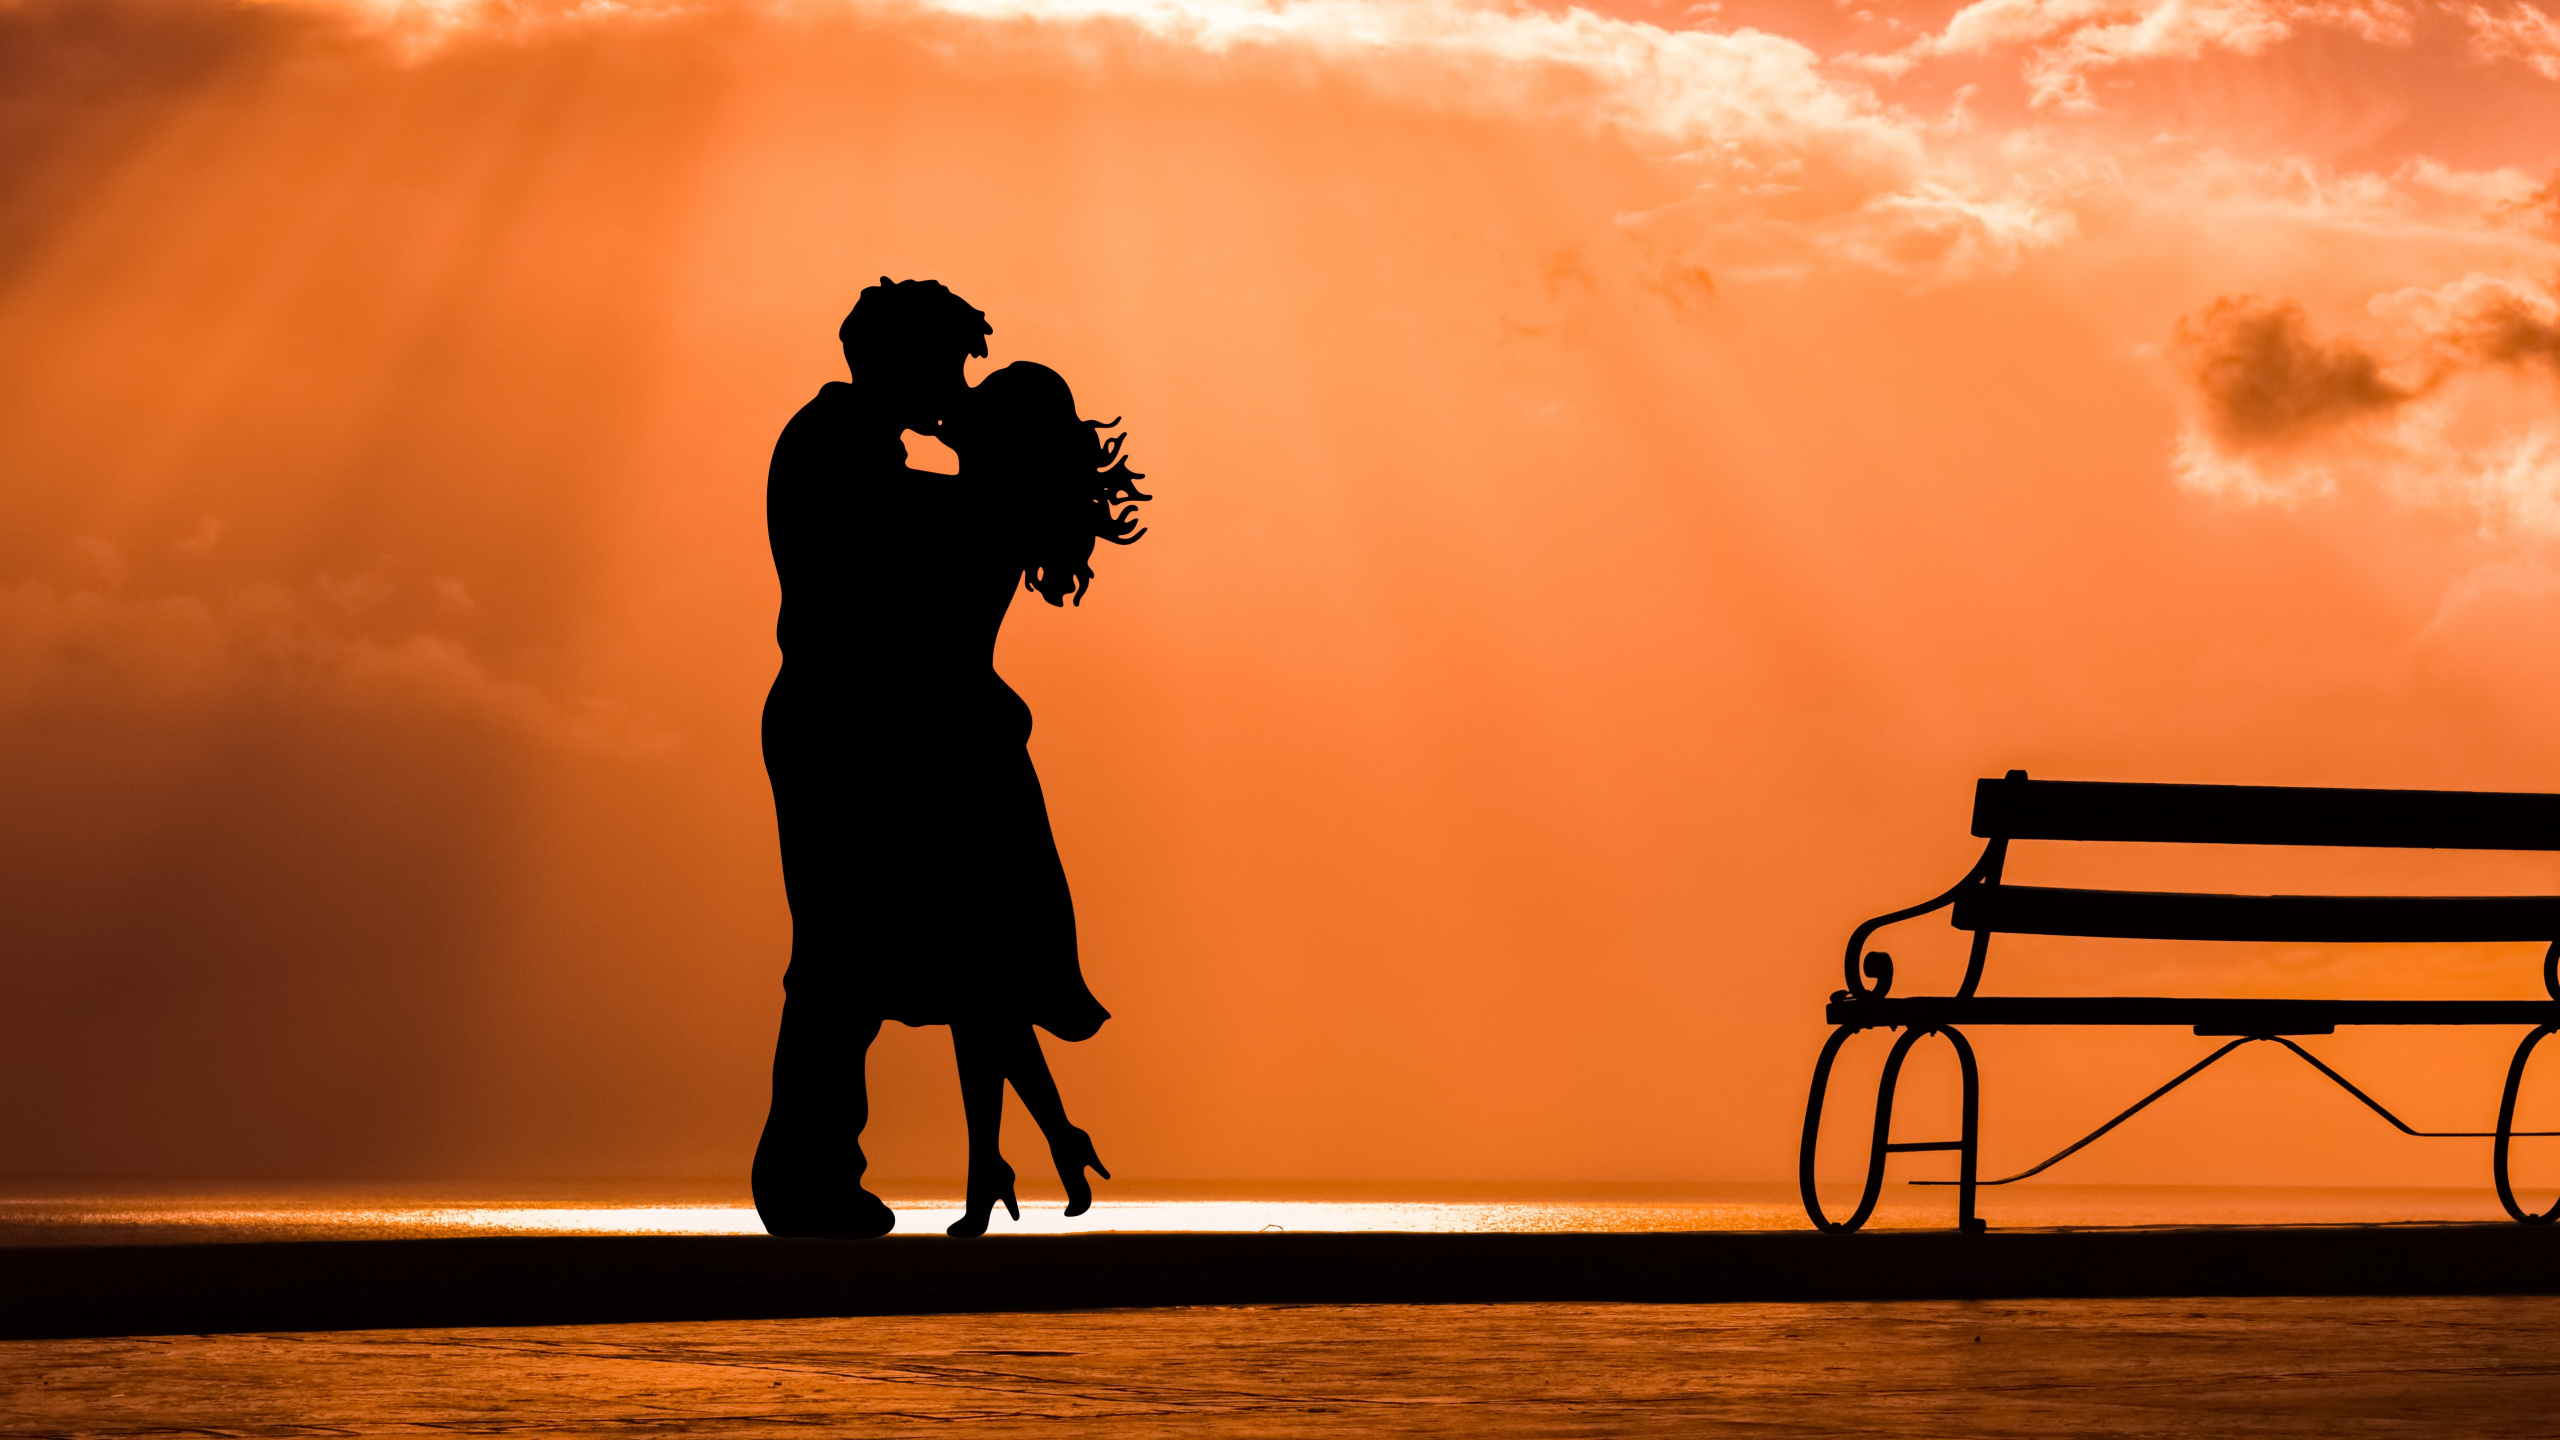 Romance, Kiss, Silhouette, People in Nature, Evening. Wallpaper in 2560x1440 Resolution